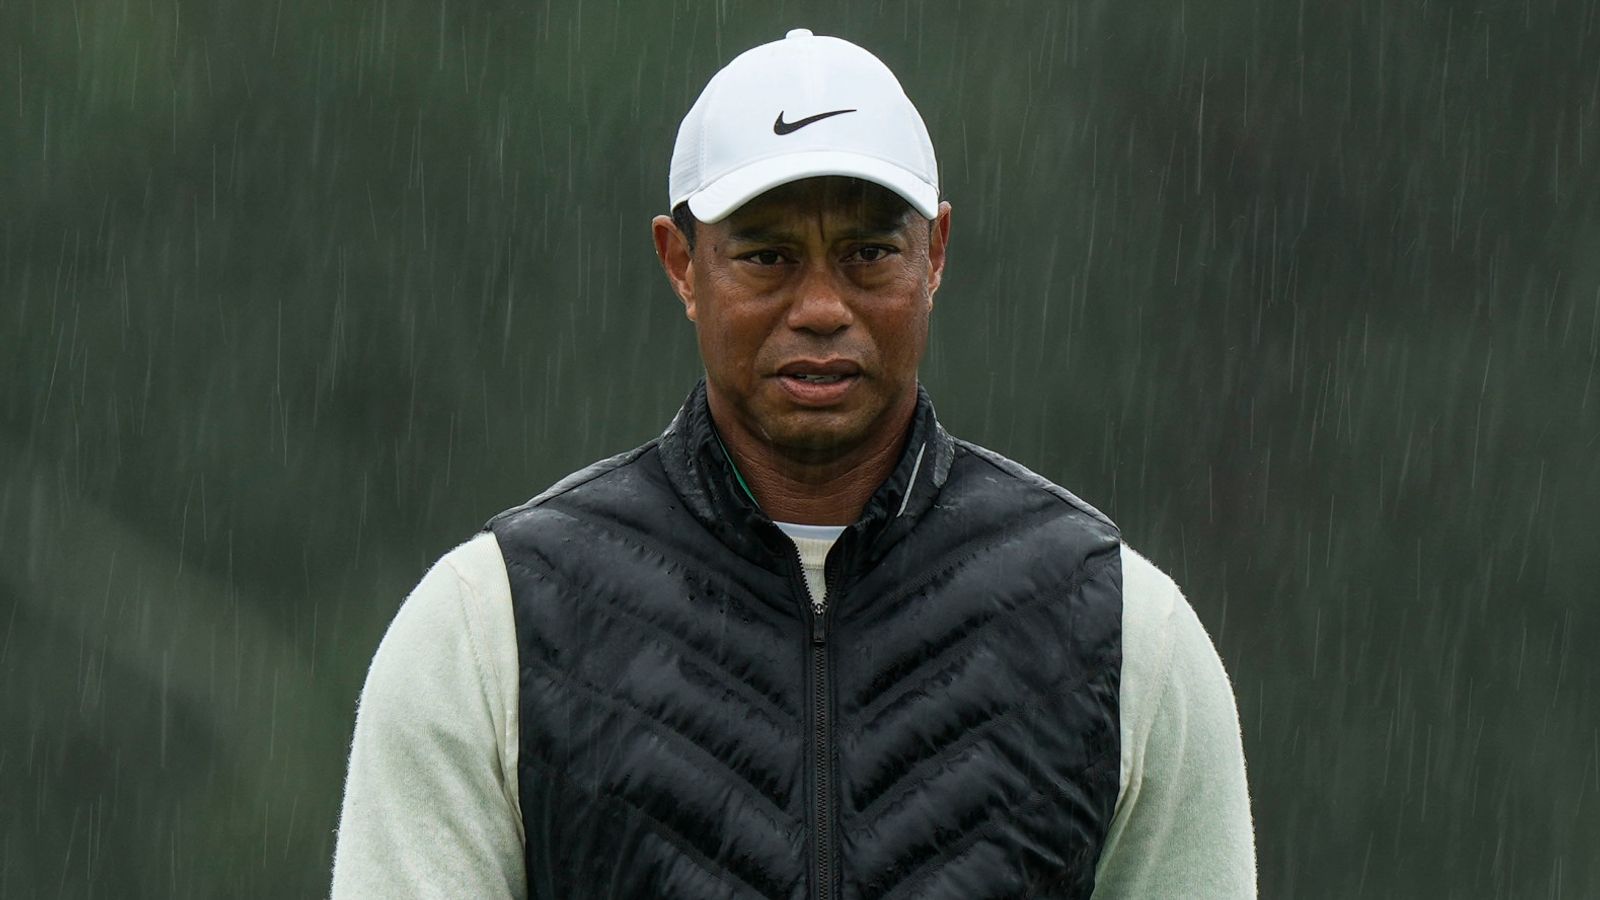 The Masters Tiger Woods withdraws due to injury ahead of resumption of